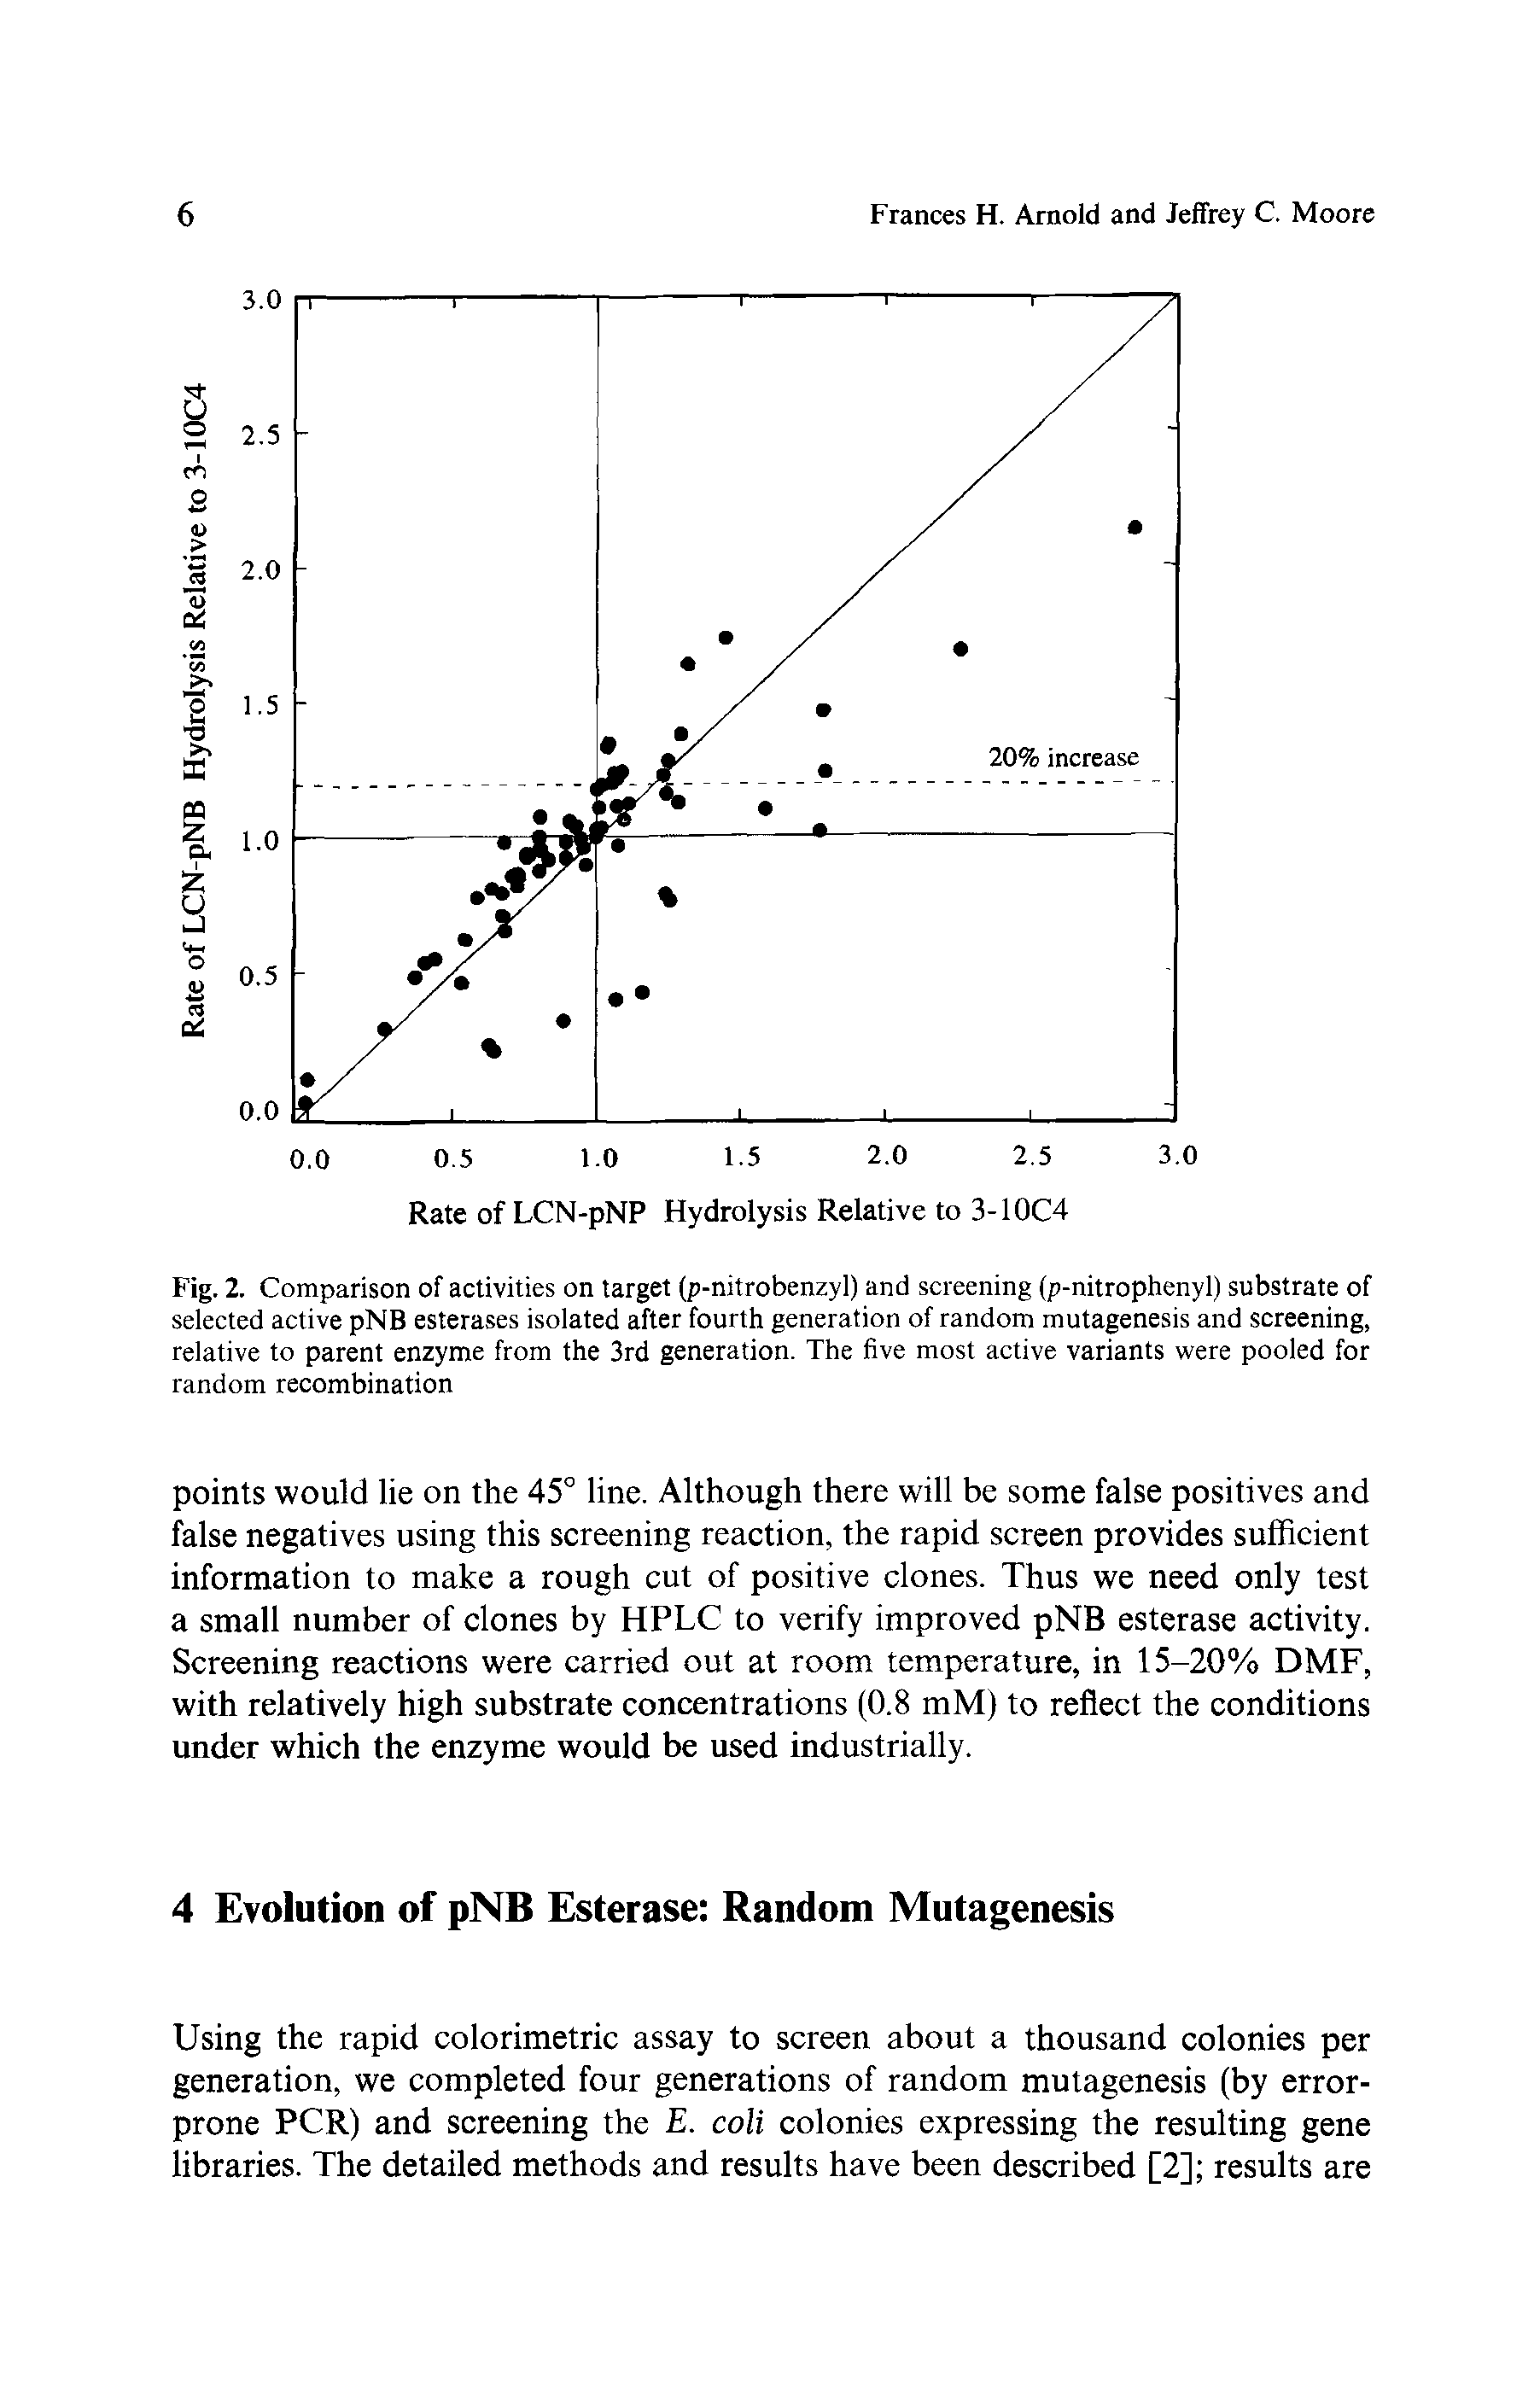 Fig. 2. Comparison of activities on target (p-nitrobenzyl) and screening (p-nitrophenyl) substrate of selected active pNB esterases isolated after fourth generation of random mutagenesis and screening, relative to parent enzyme from the 3rd generation. The five most active variants were pooled for random recombination...